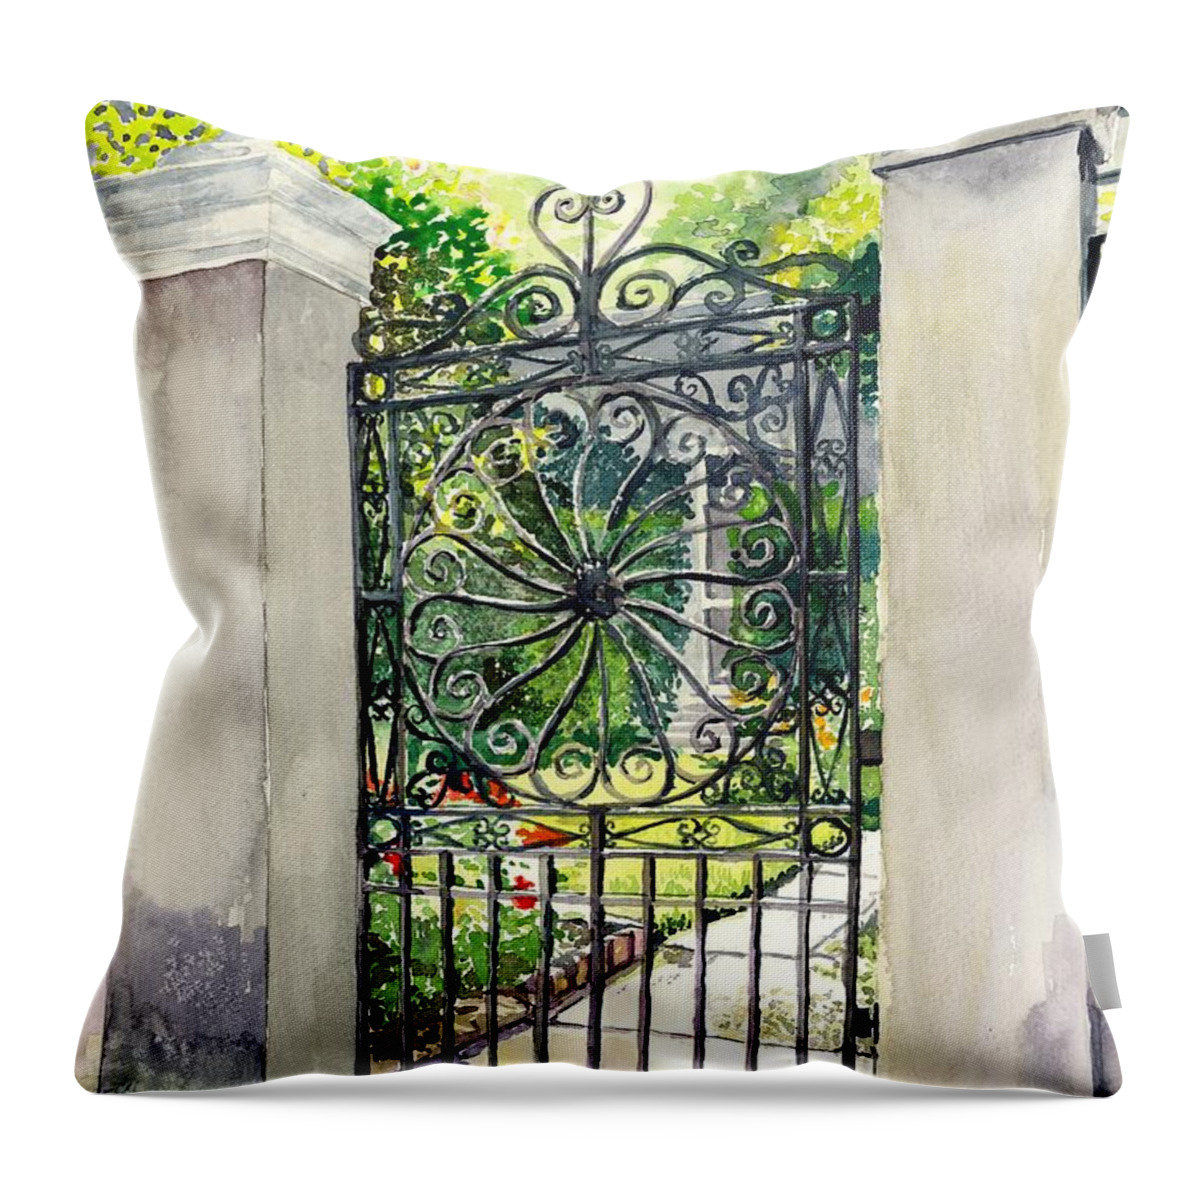 Iron Throw Pillow featuring the painting Iron Wheel gate by Merana Cadorette